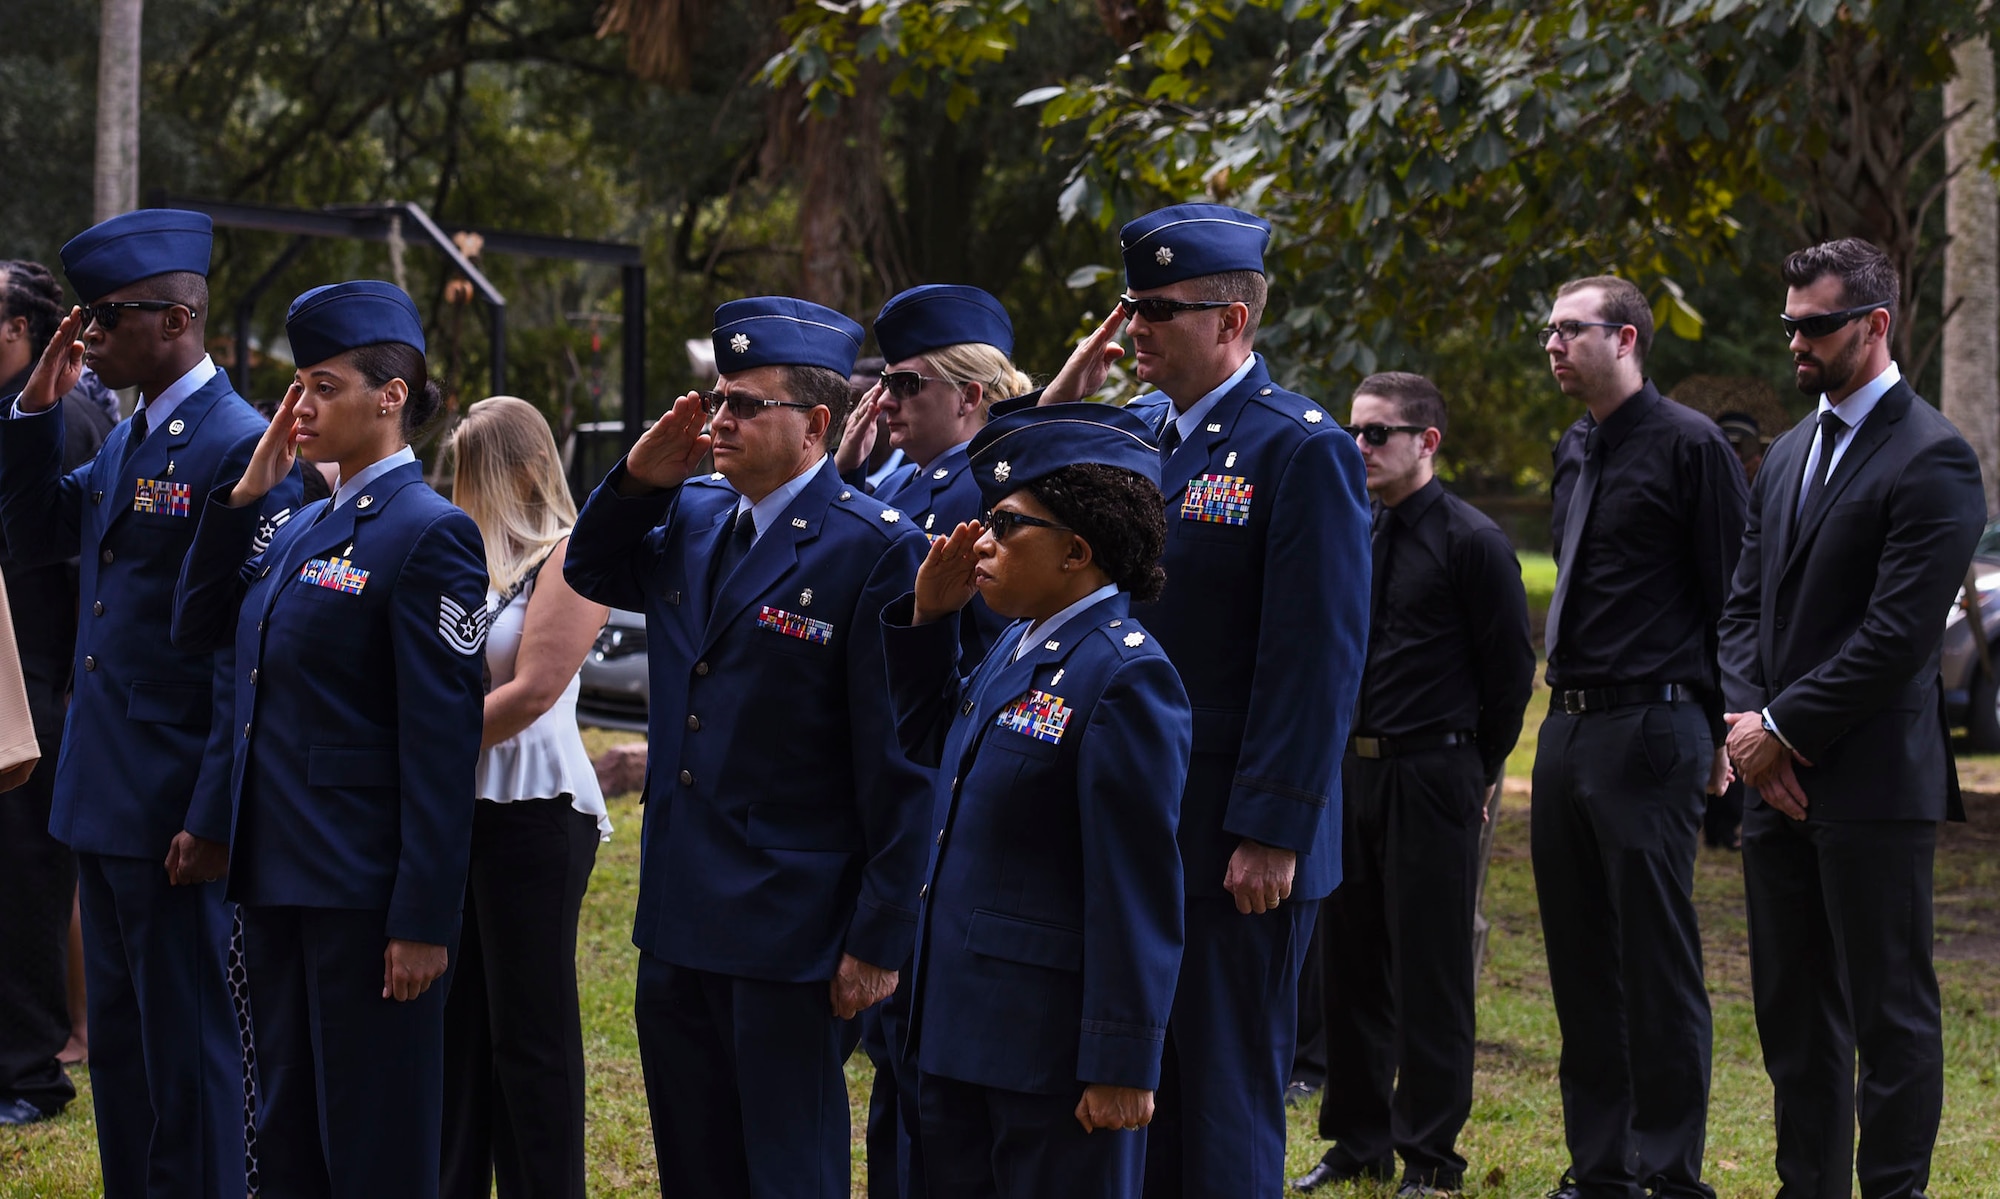 Friends from Elmendorf Air Force Base, Alaska and Whiteman Air Force Base, Mo., render salutes during a funeral, Oct. 17, 2016, in Sparr, Fla.  The funeral was in honor of Staff Sgt. Darryl Smith, who was a laboratory technician stationed at Elmendorf AFB from 2012-2015 and finished his career at Whiteman AFB. (U.S. Air Force photo by Airman 1st Class Greg Nash)